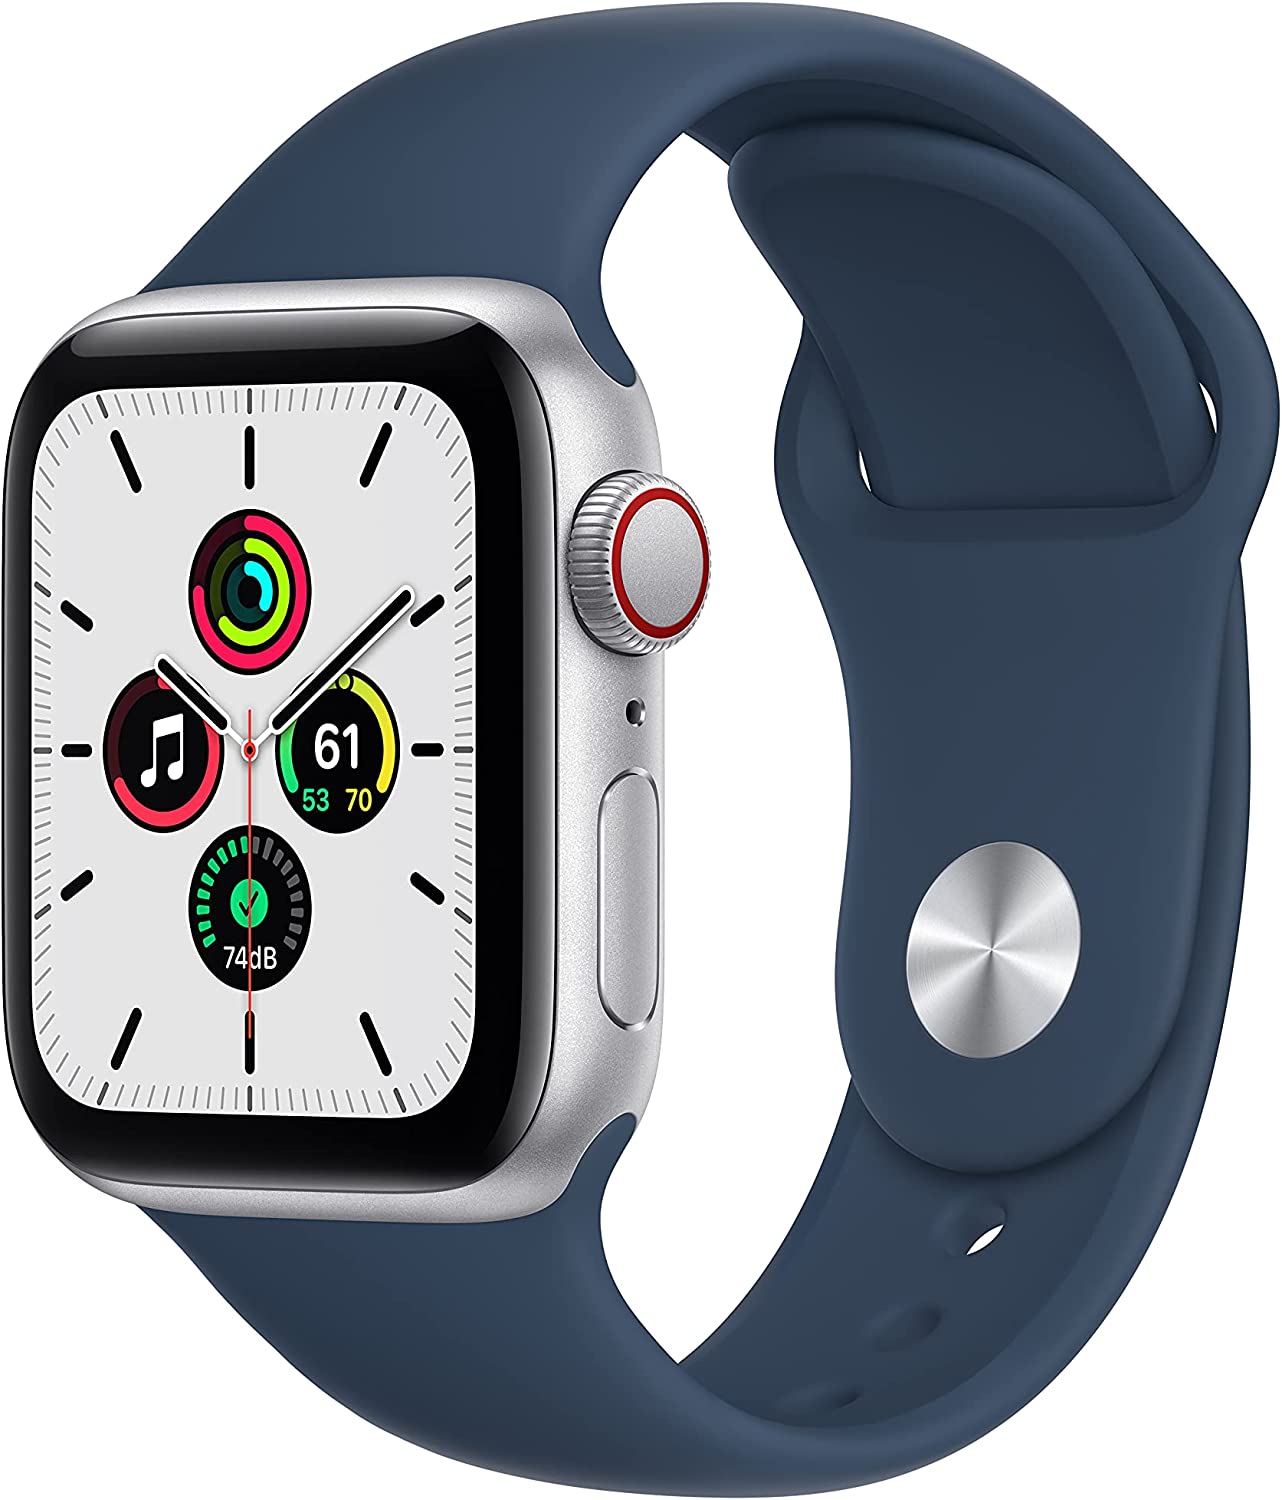 Apple Watch SE (1st Gen) GPS + Cellular 40mm Silver Aluminum Case Abyss Blue Sport Band - Regular with Family Set Up - image 1 of 1